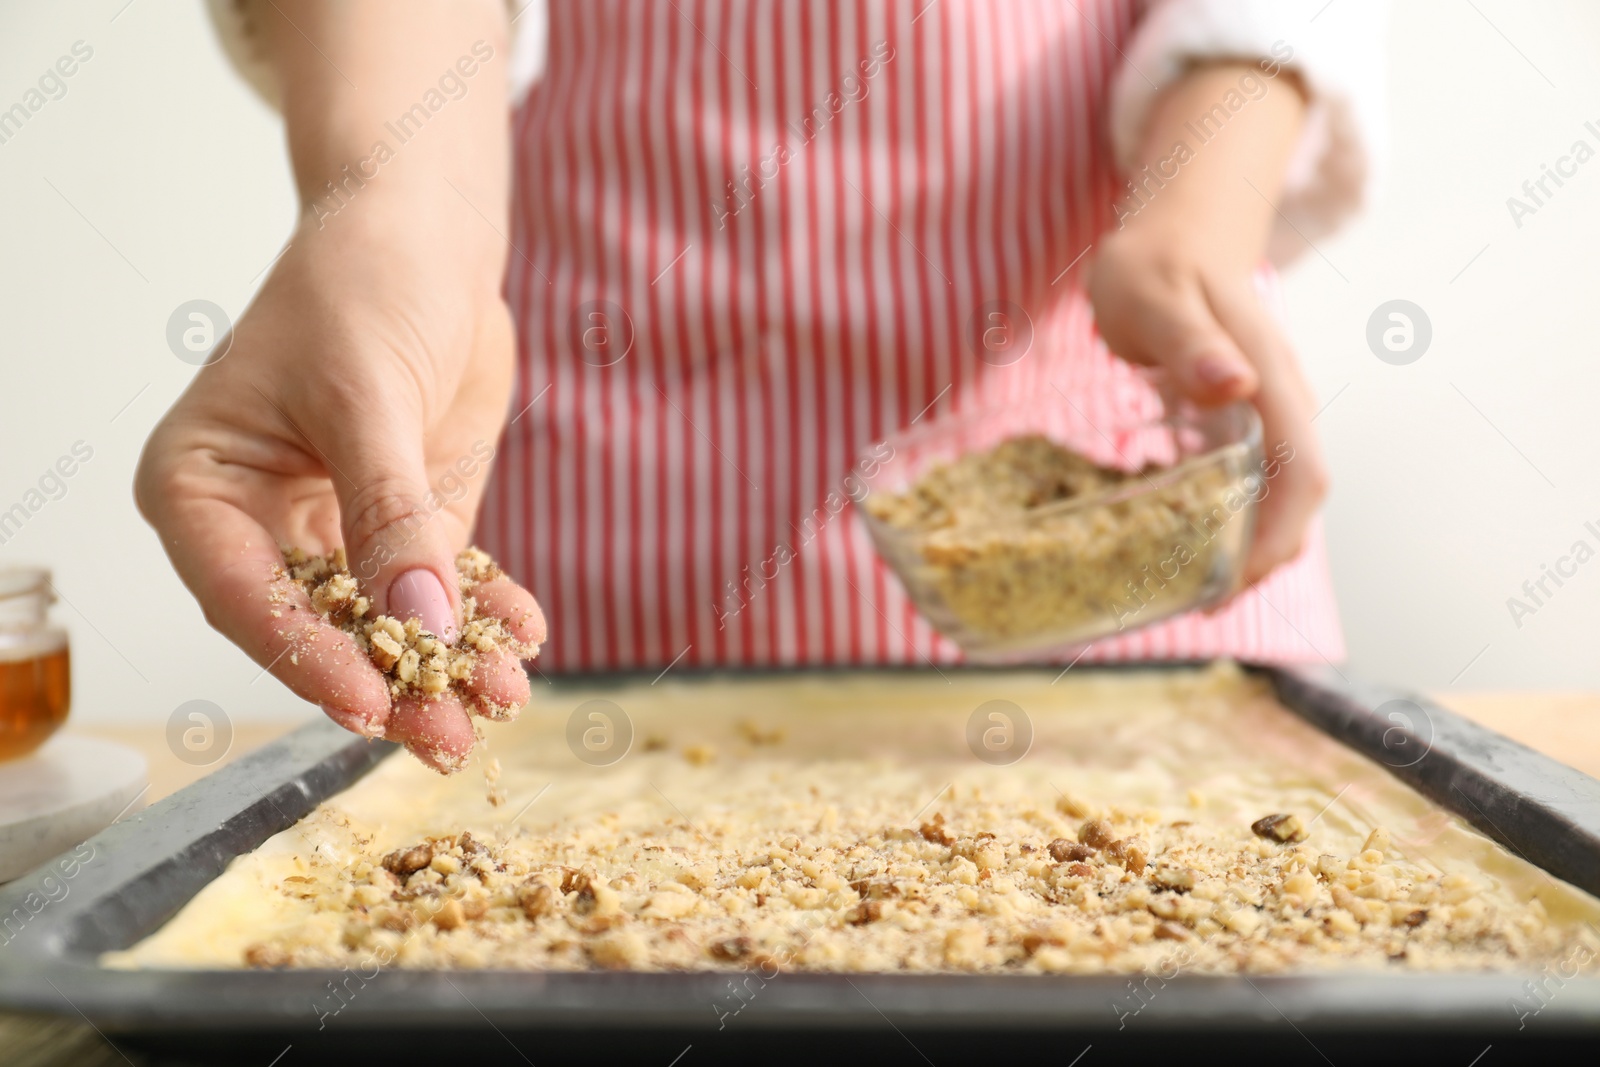 Photo of Making delicious baklava. Woman adding chopped nuts to dough at table, closeup